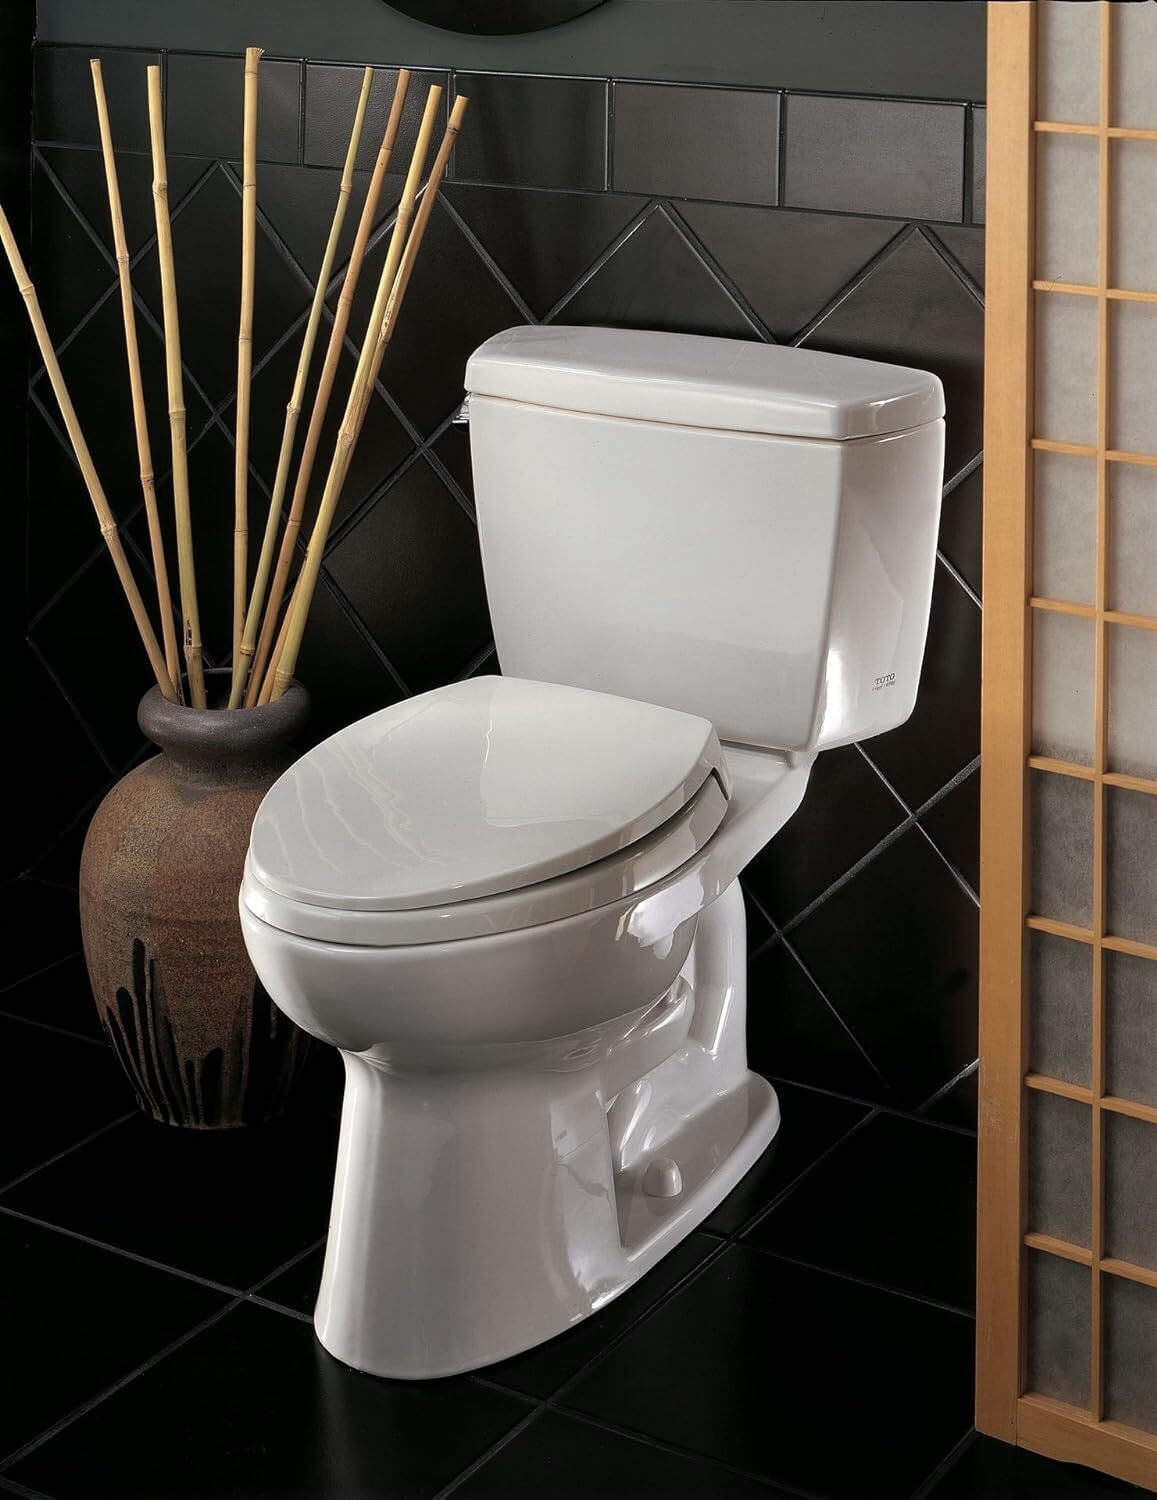 Best-Toilet-for-Flushing-Large-Waste-Reviews-&-Buying-Guide-TN